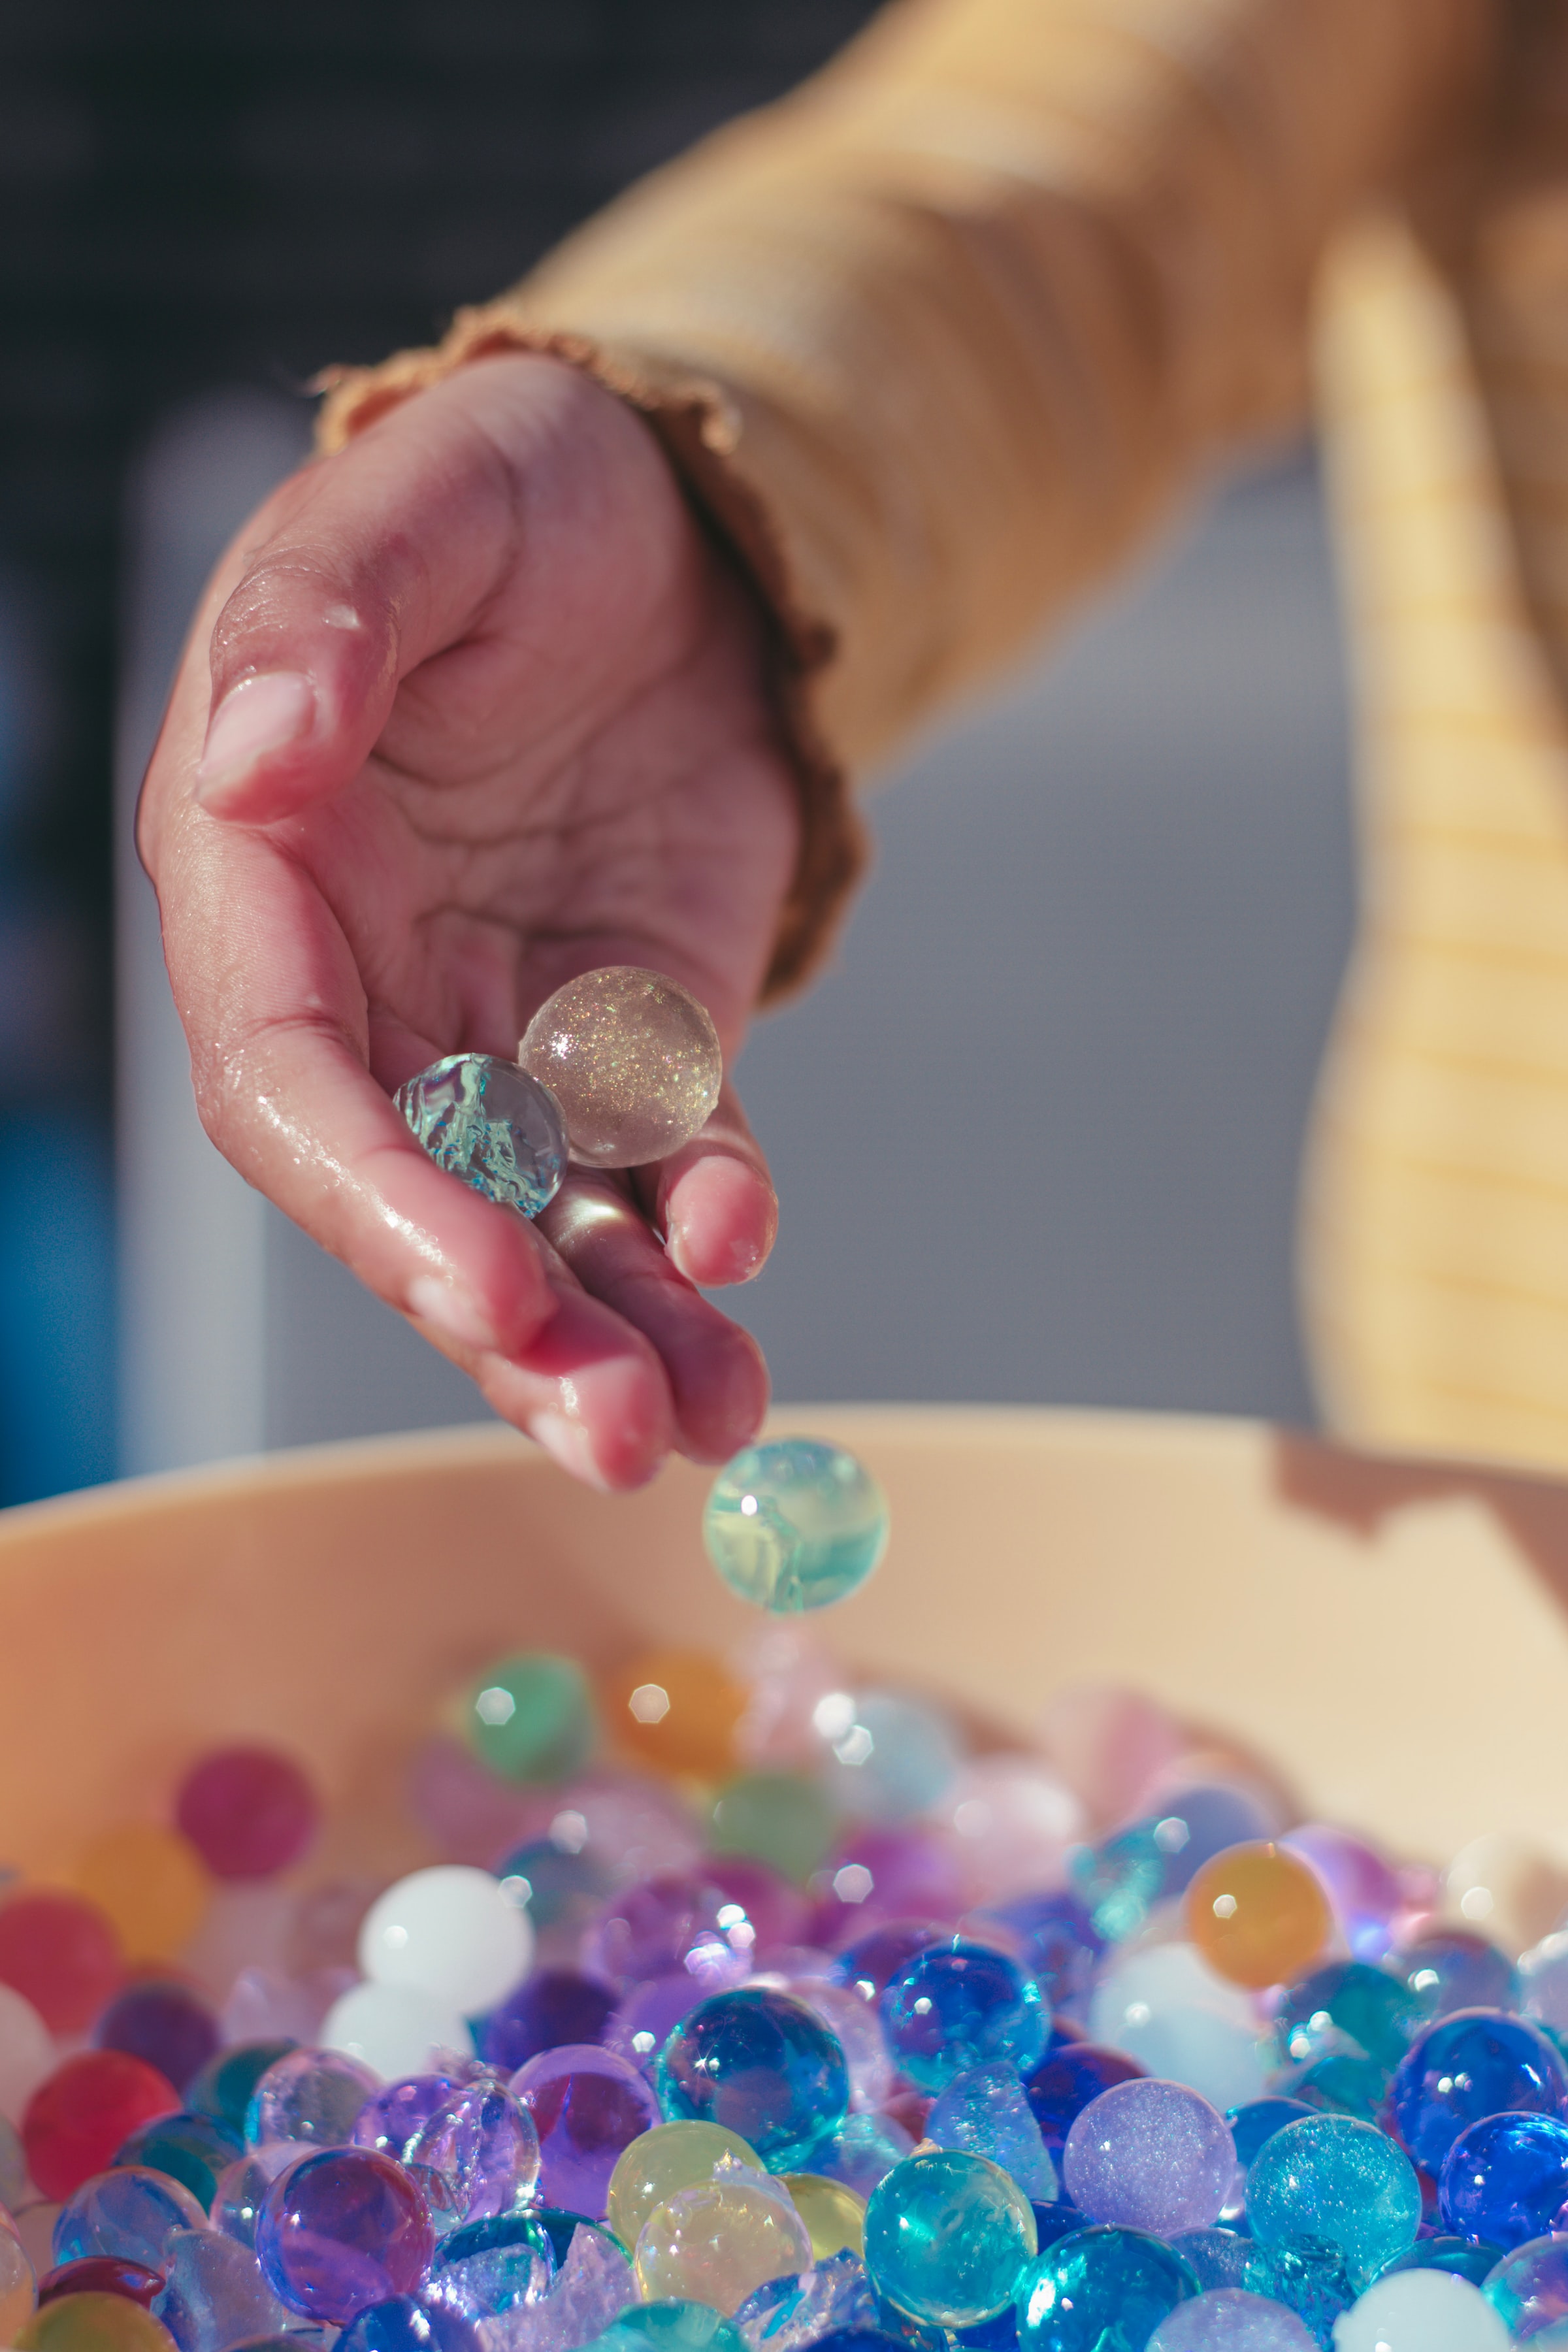 a child's hand scooping up sensory water beads